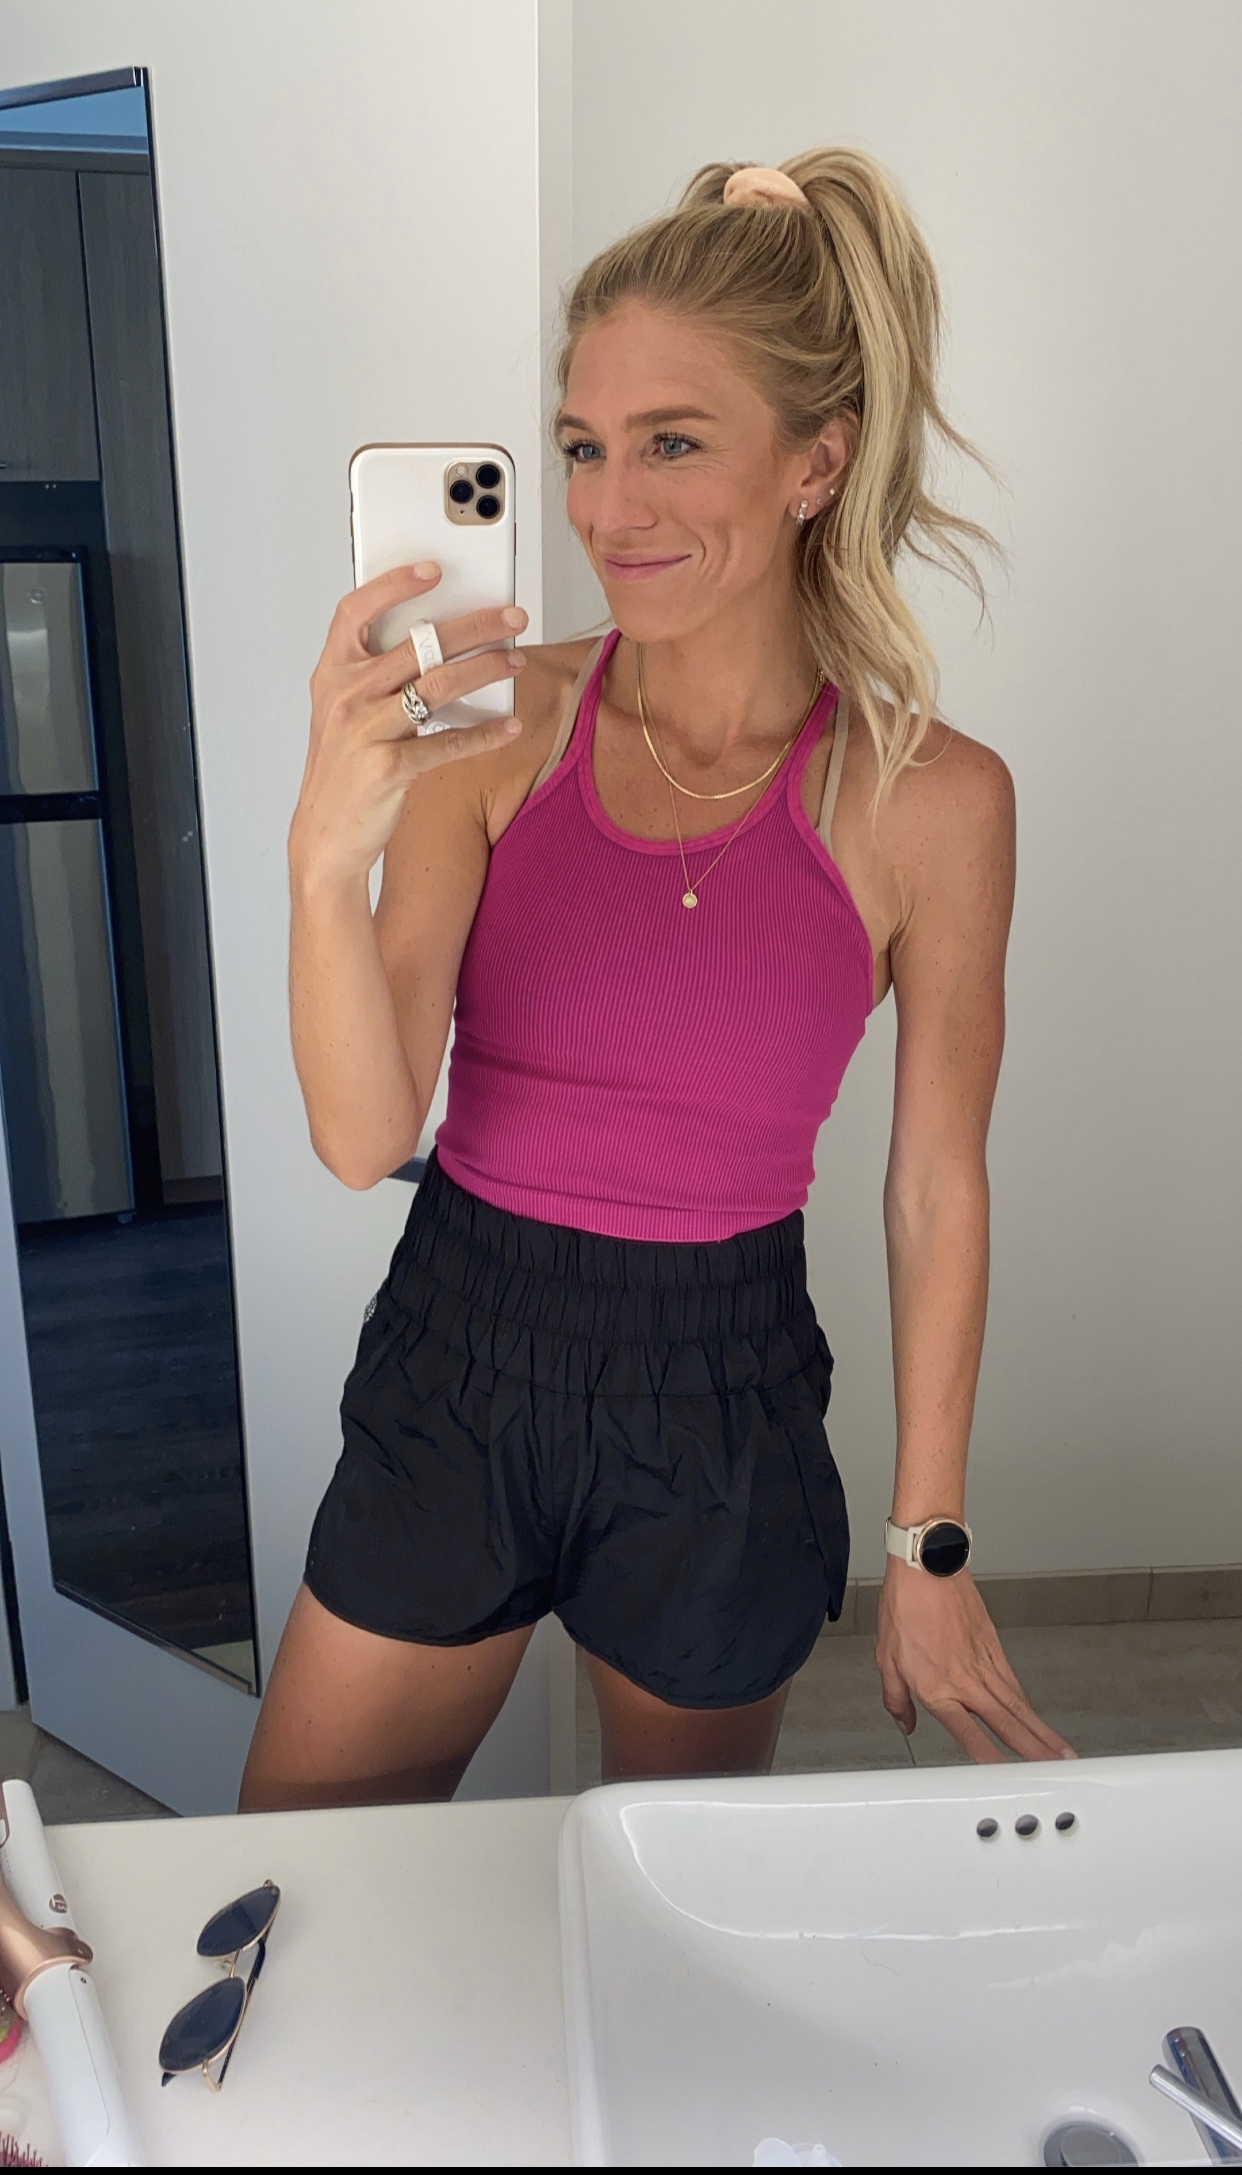 best running shorts free people the way home short